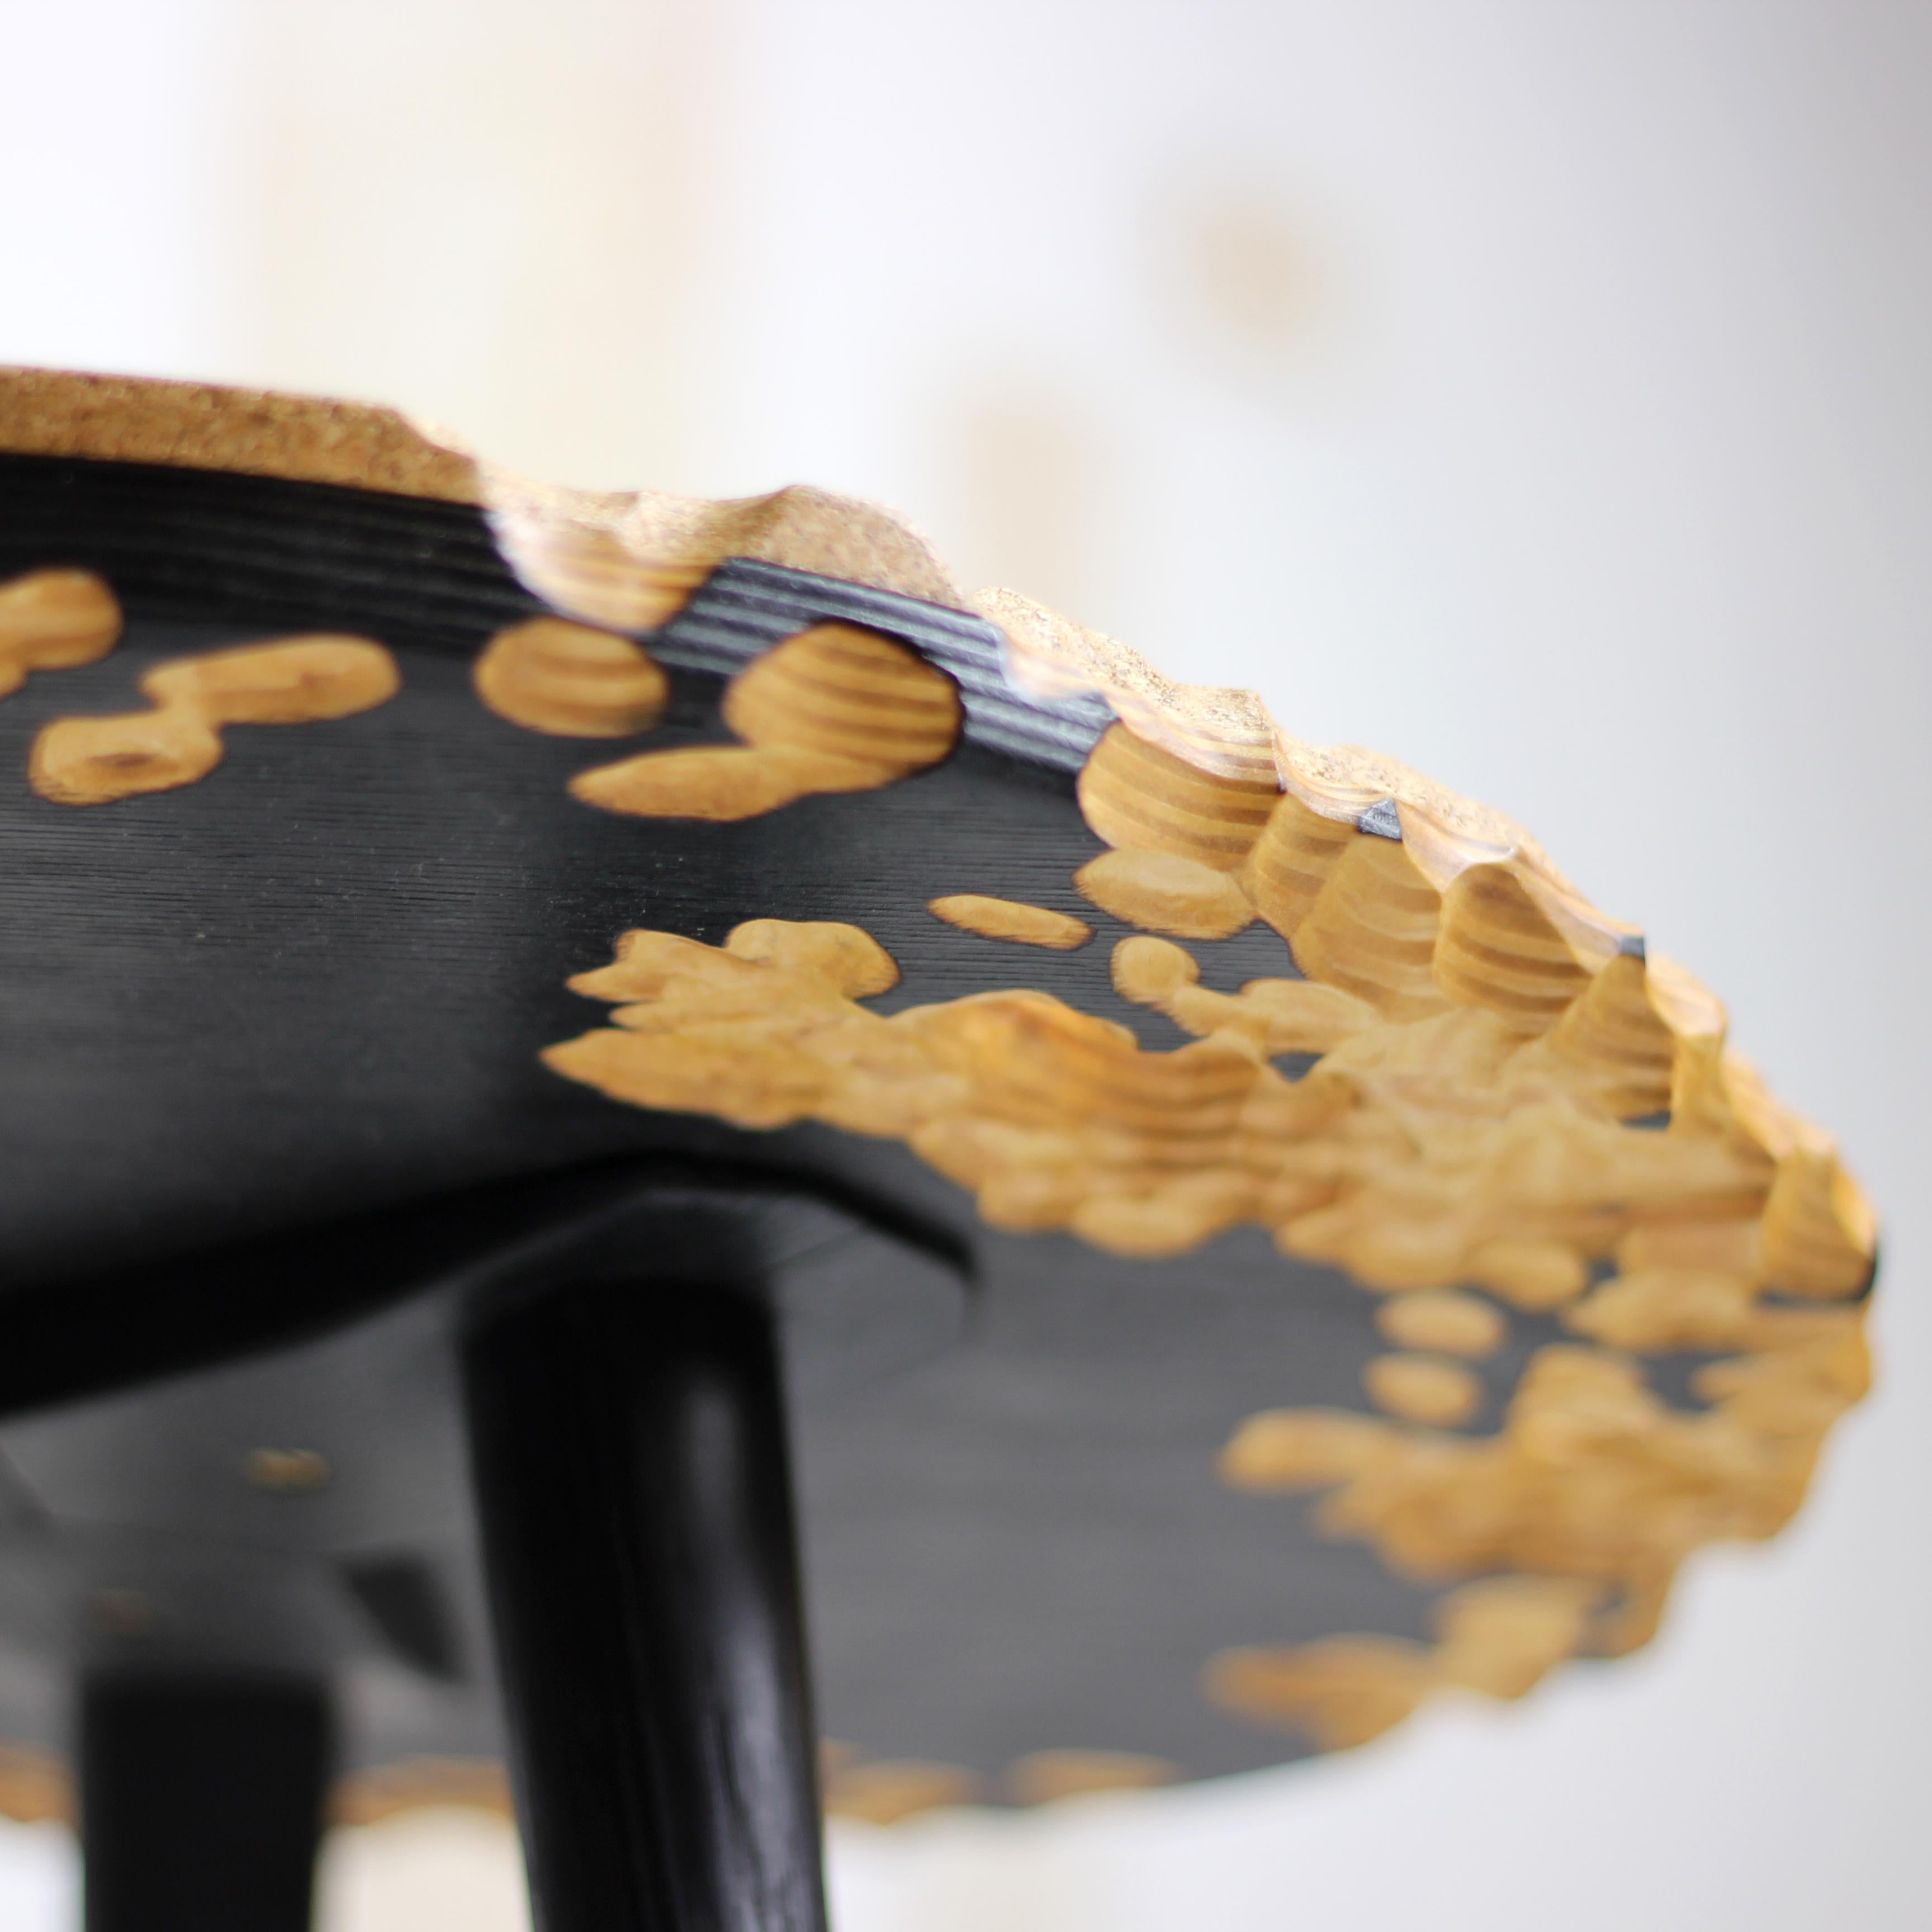 Moon - Side Table, Unique Sculptured Furniture, from Reclaimed Wood and Cork For Sale 1